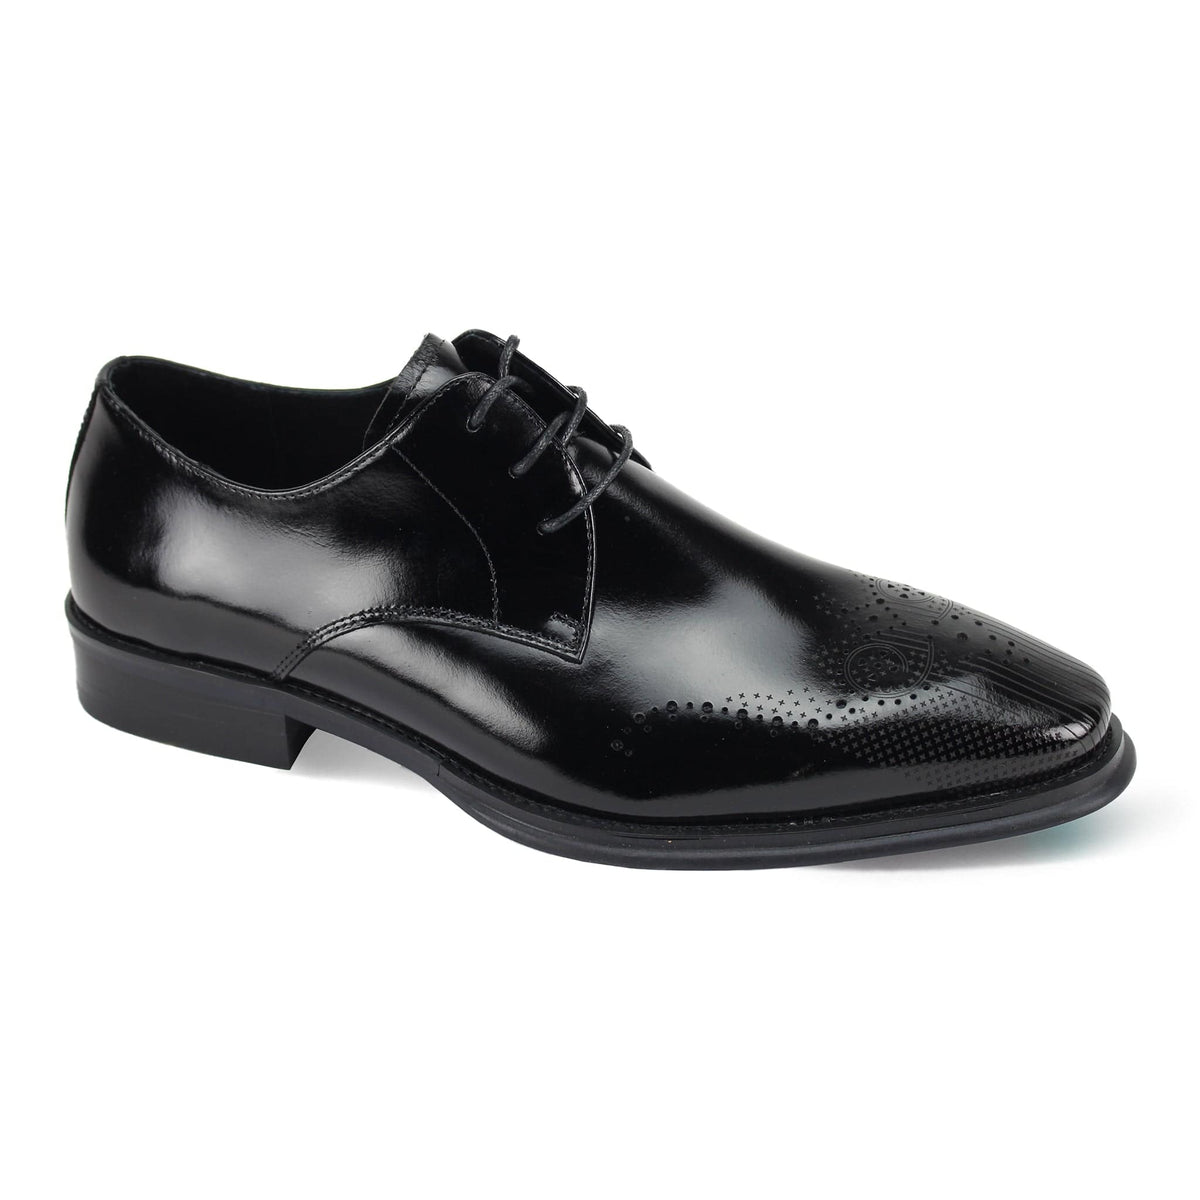 GIOVANNI LEATHER SHOES FT BLACK / 7 GIOVANNI LEATHER SHOES-OWEN